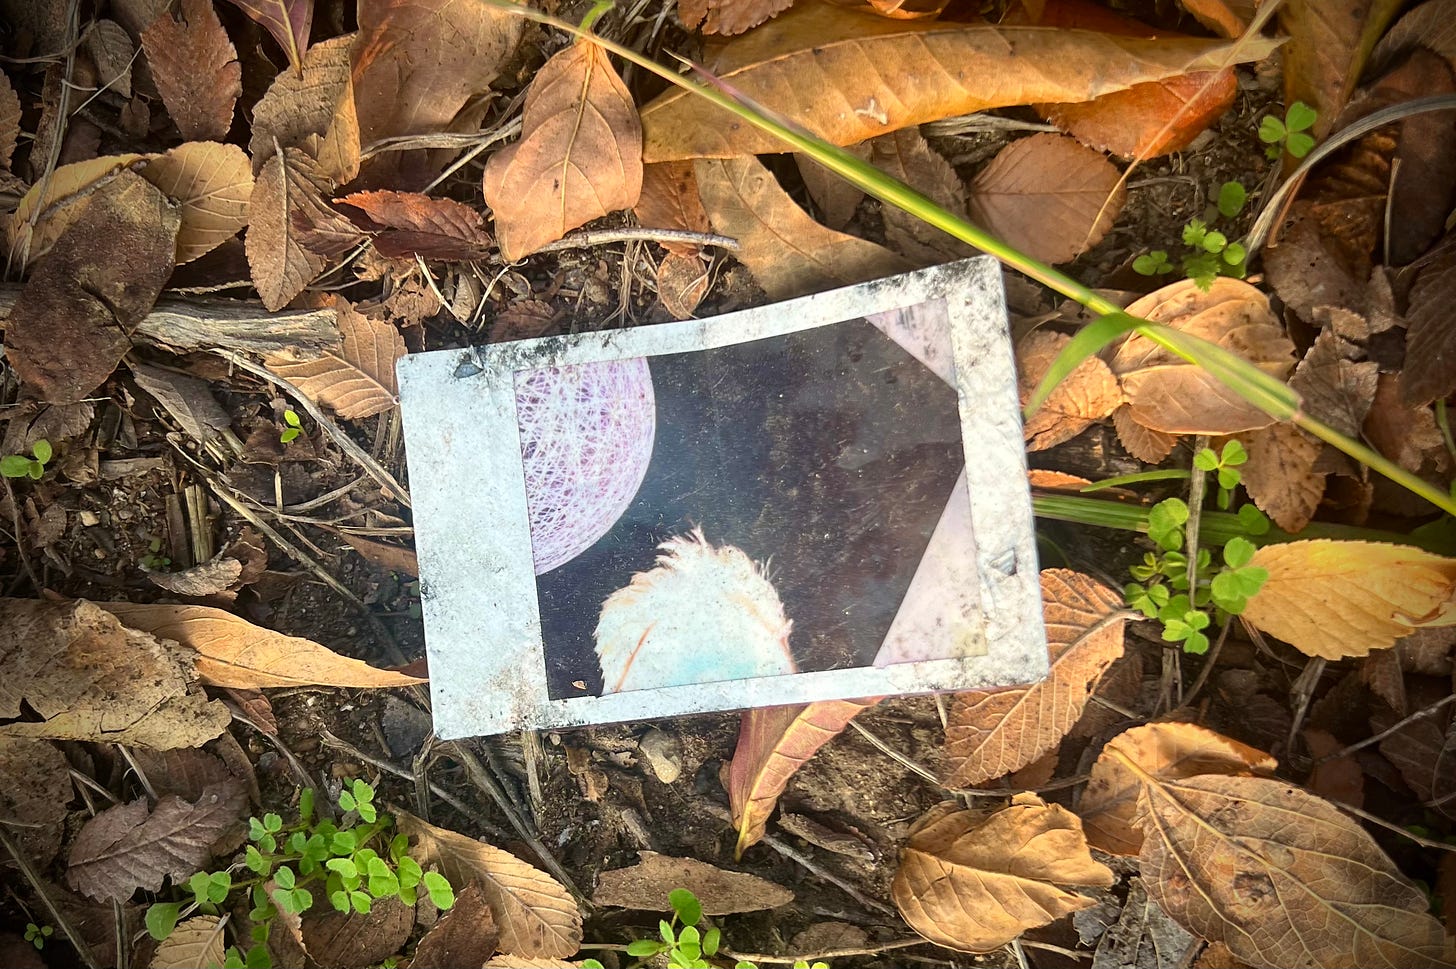 Image of a Polaroid thrown by the side of the road, showing a part of a head in a disco-looking environment